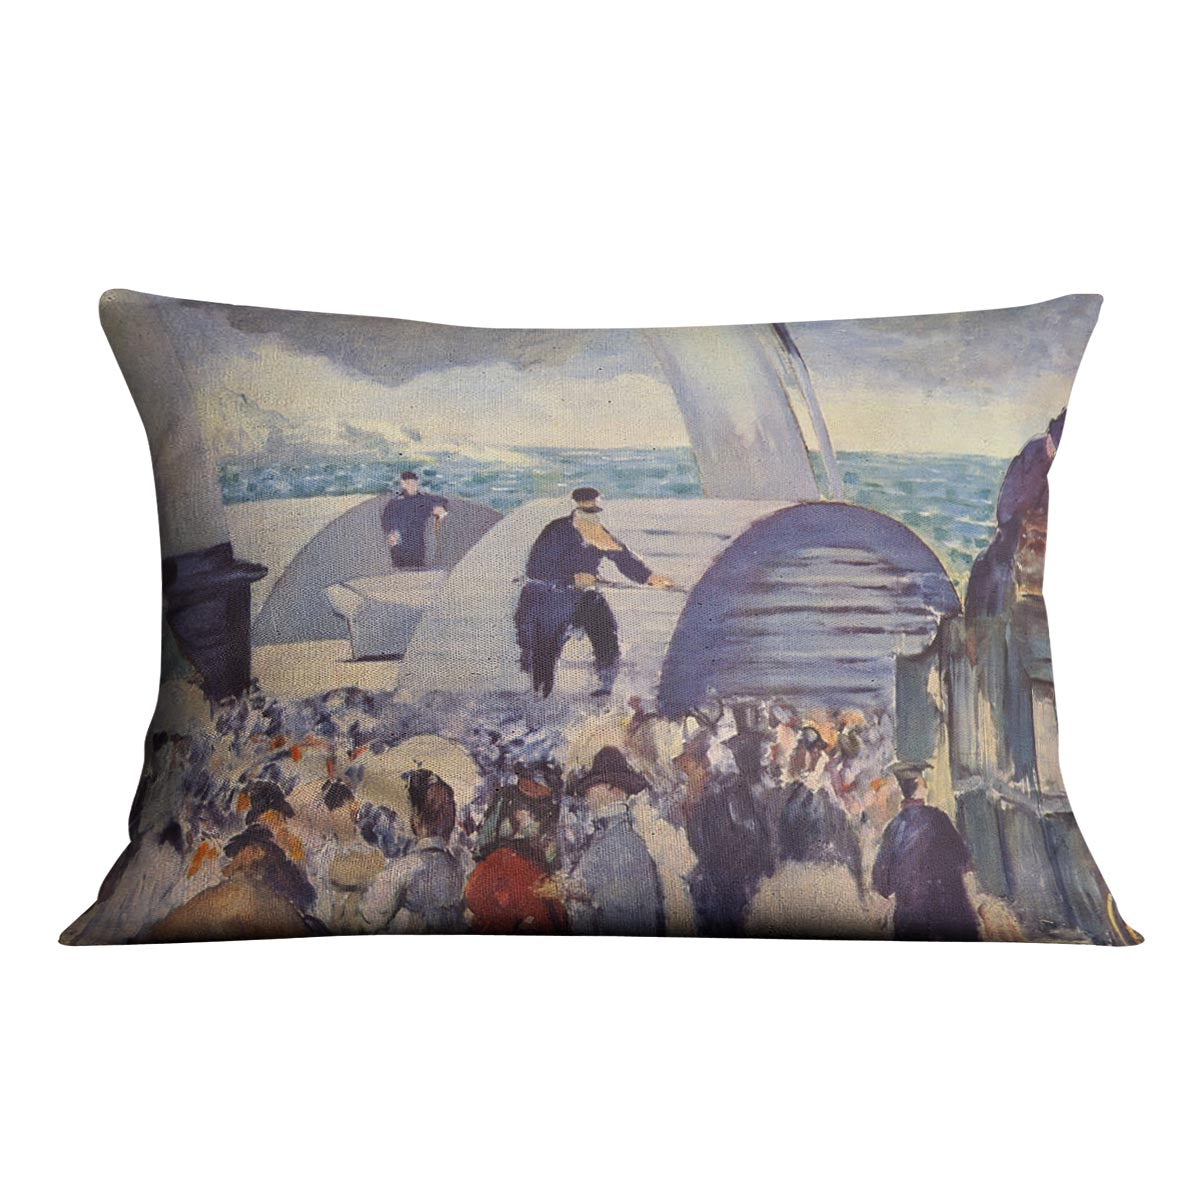 Embarkation of the Folkestone by Manet Cushion